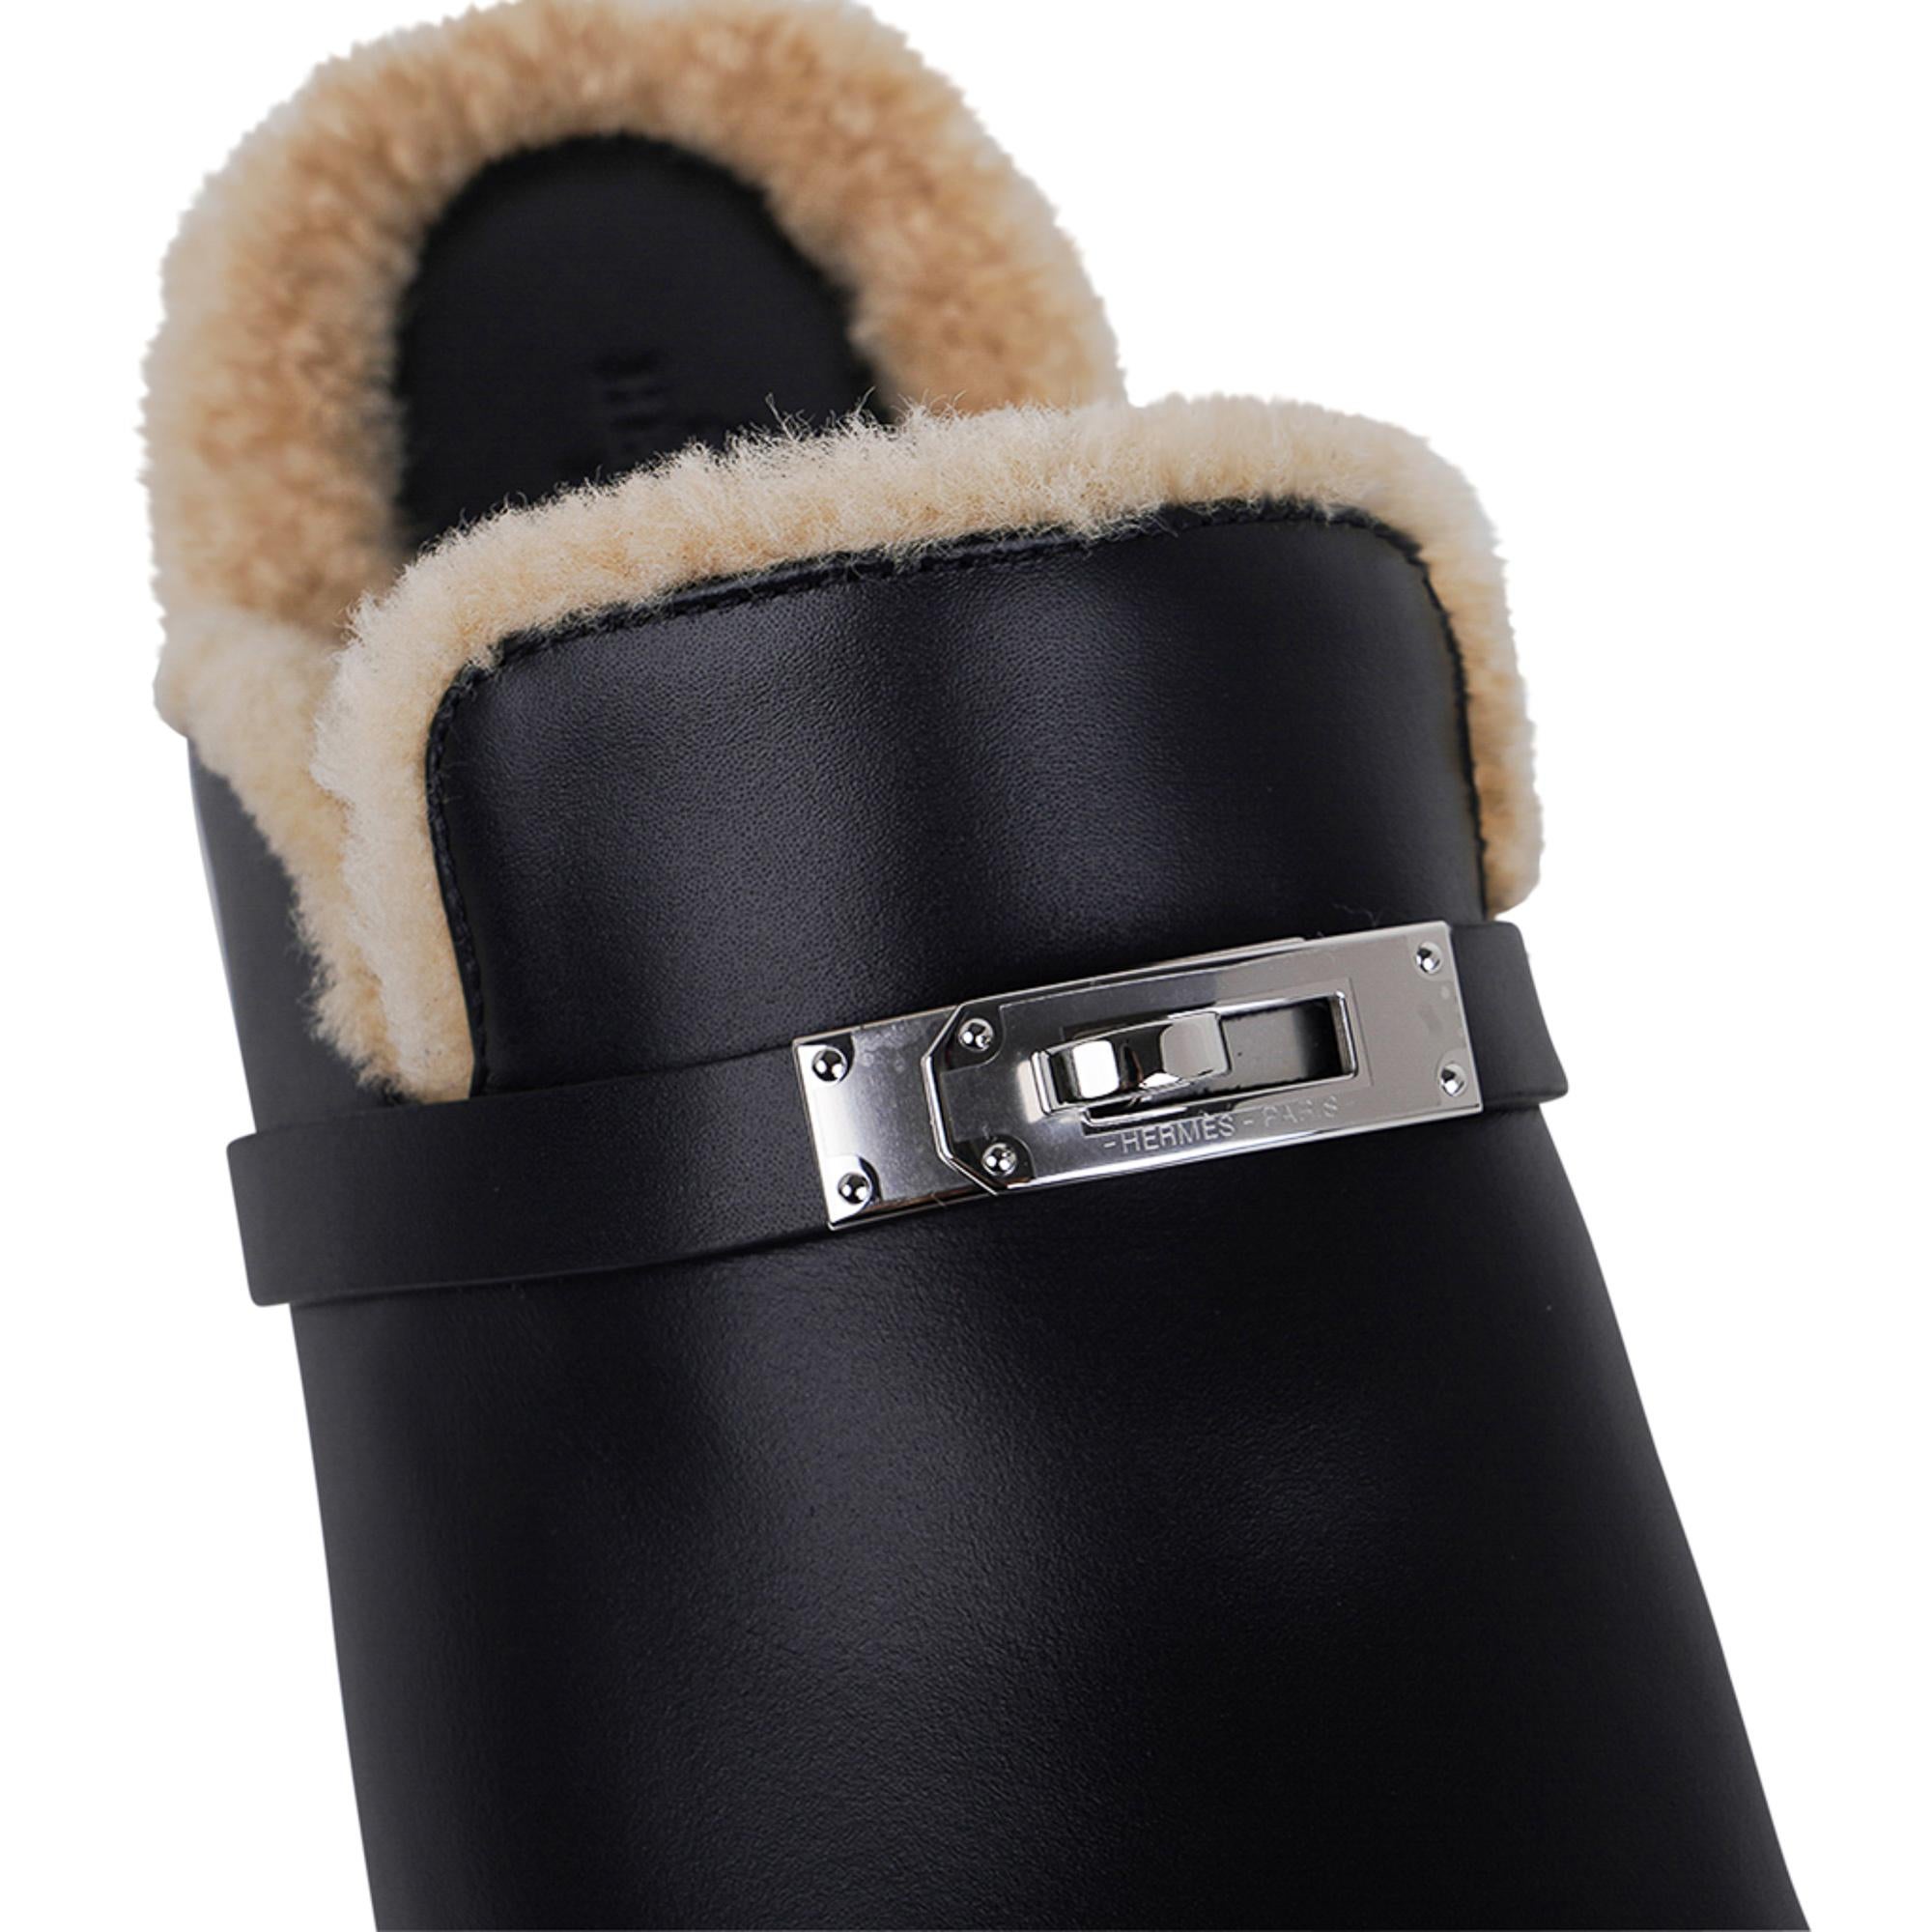 Mightychic offers a pair of Hermes Carlotta Mules featured in Black with shearling.
Calfskin accentuated with lined Shearling (woolskin).
Palladium Kelly buckle and studs.
Dark Beechwood sole.
These chic casual shoes are the trend as clogs are
set